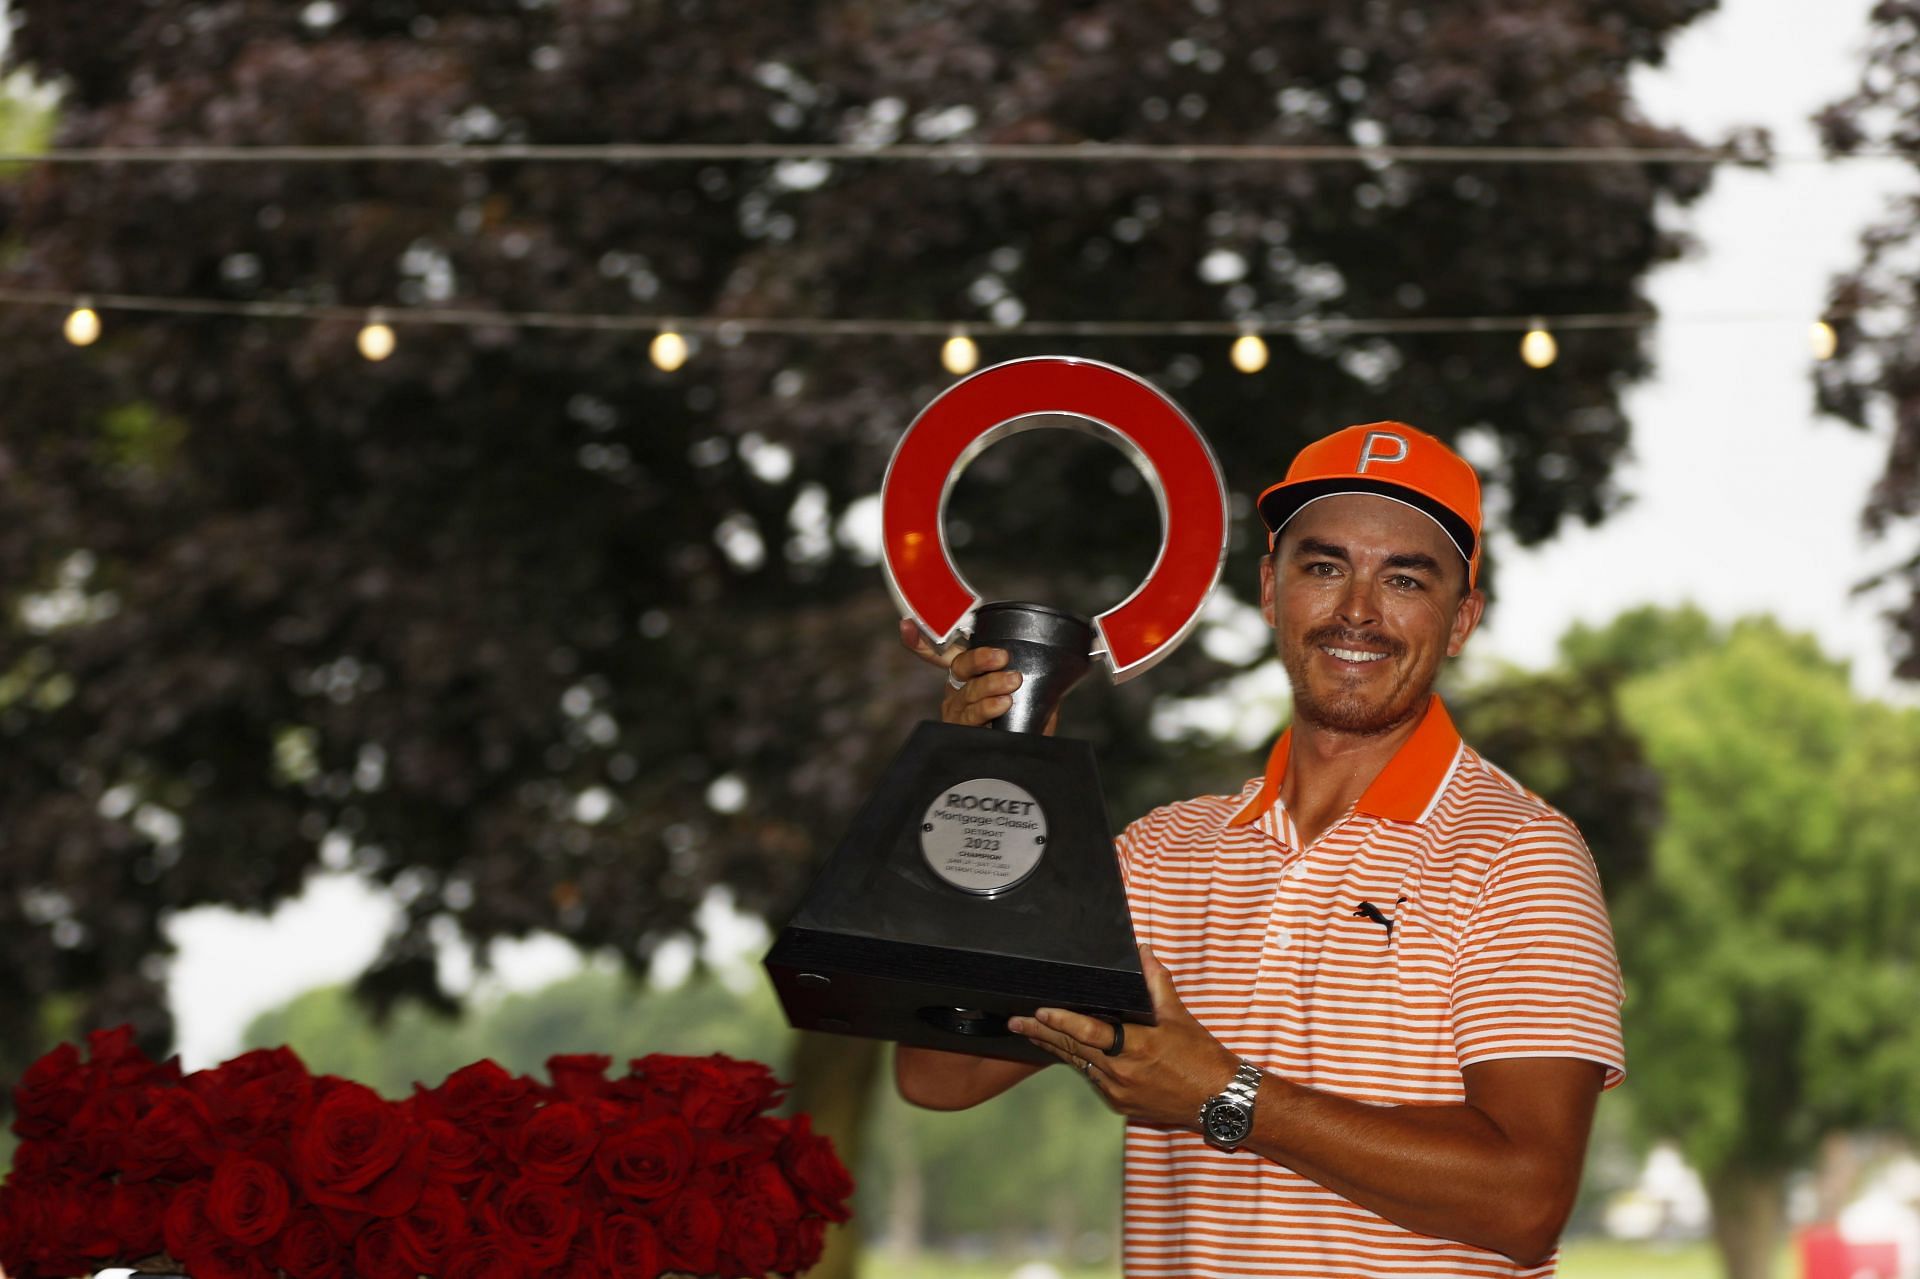 Rickie Fowler poses with the trophy after winning the Rocket Mortgage Classic in a playoff